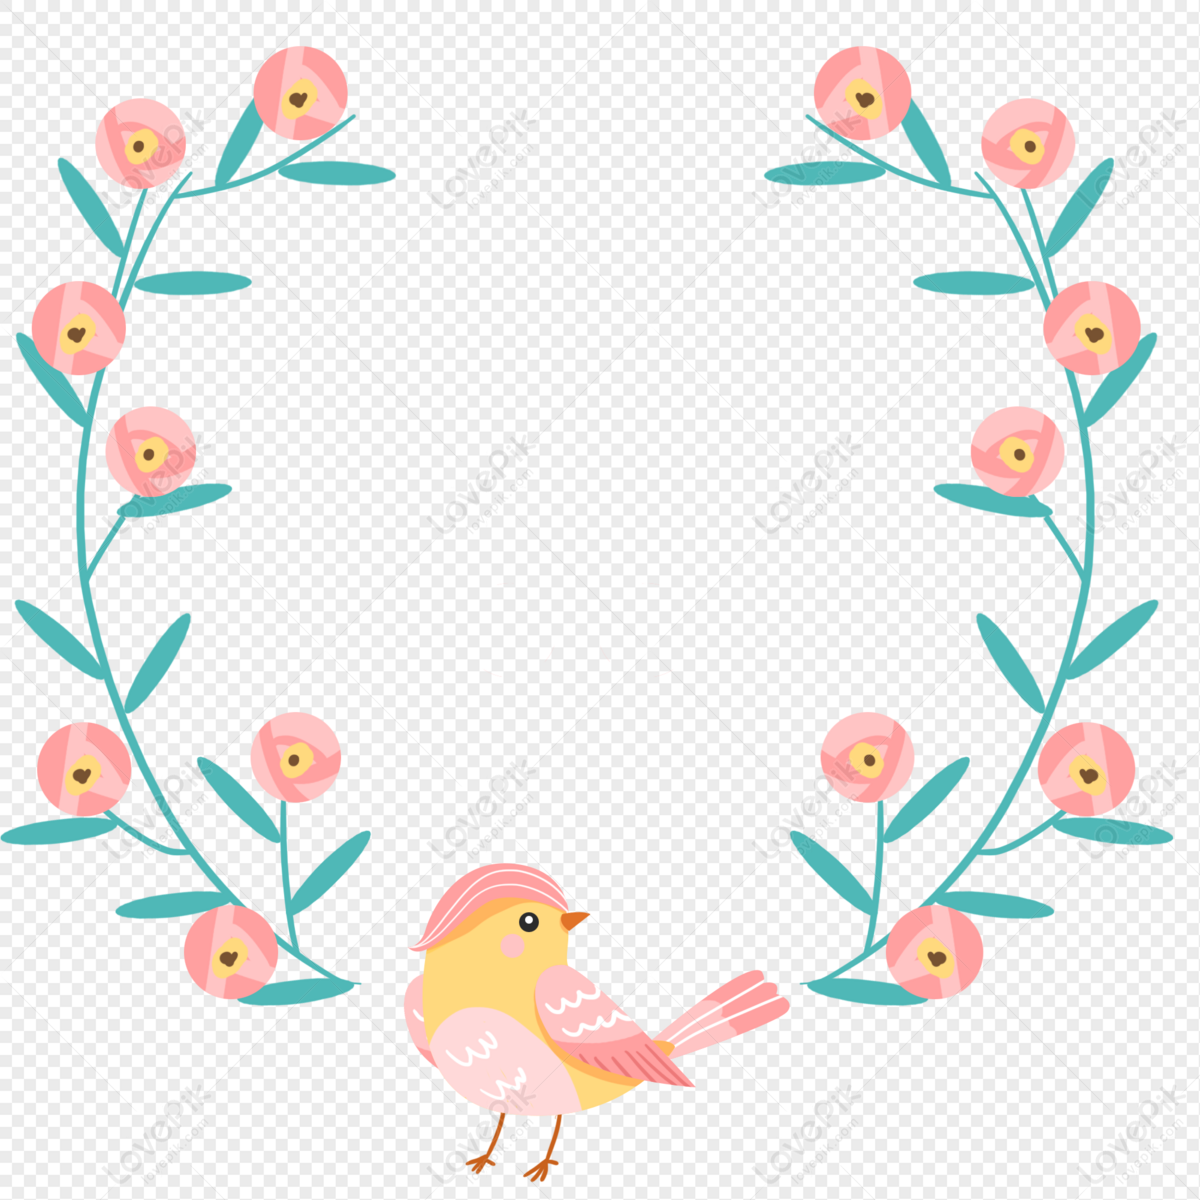 Hand Drawn Bird Flowers Decorative Lace Border PNG Picture And Clipart ...